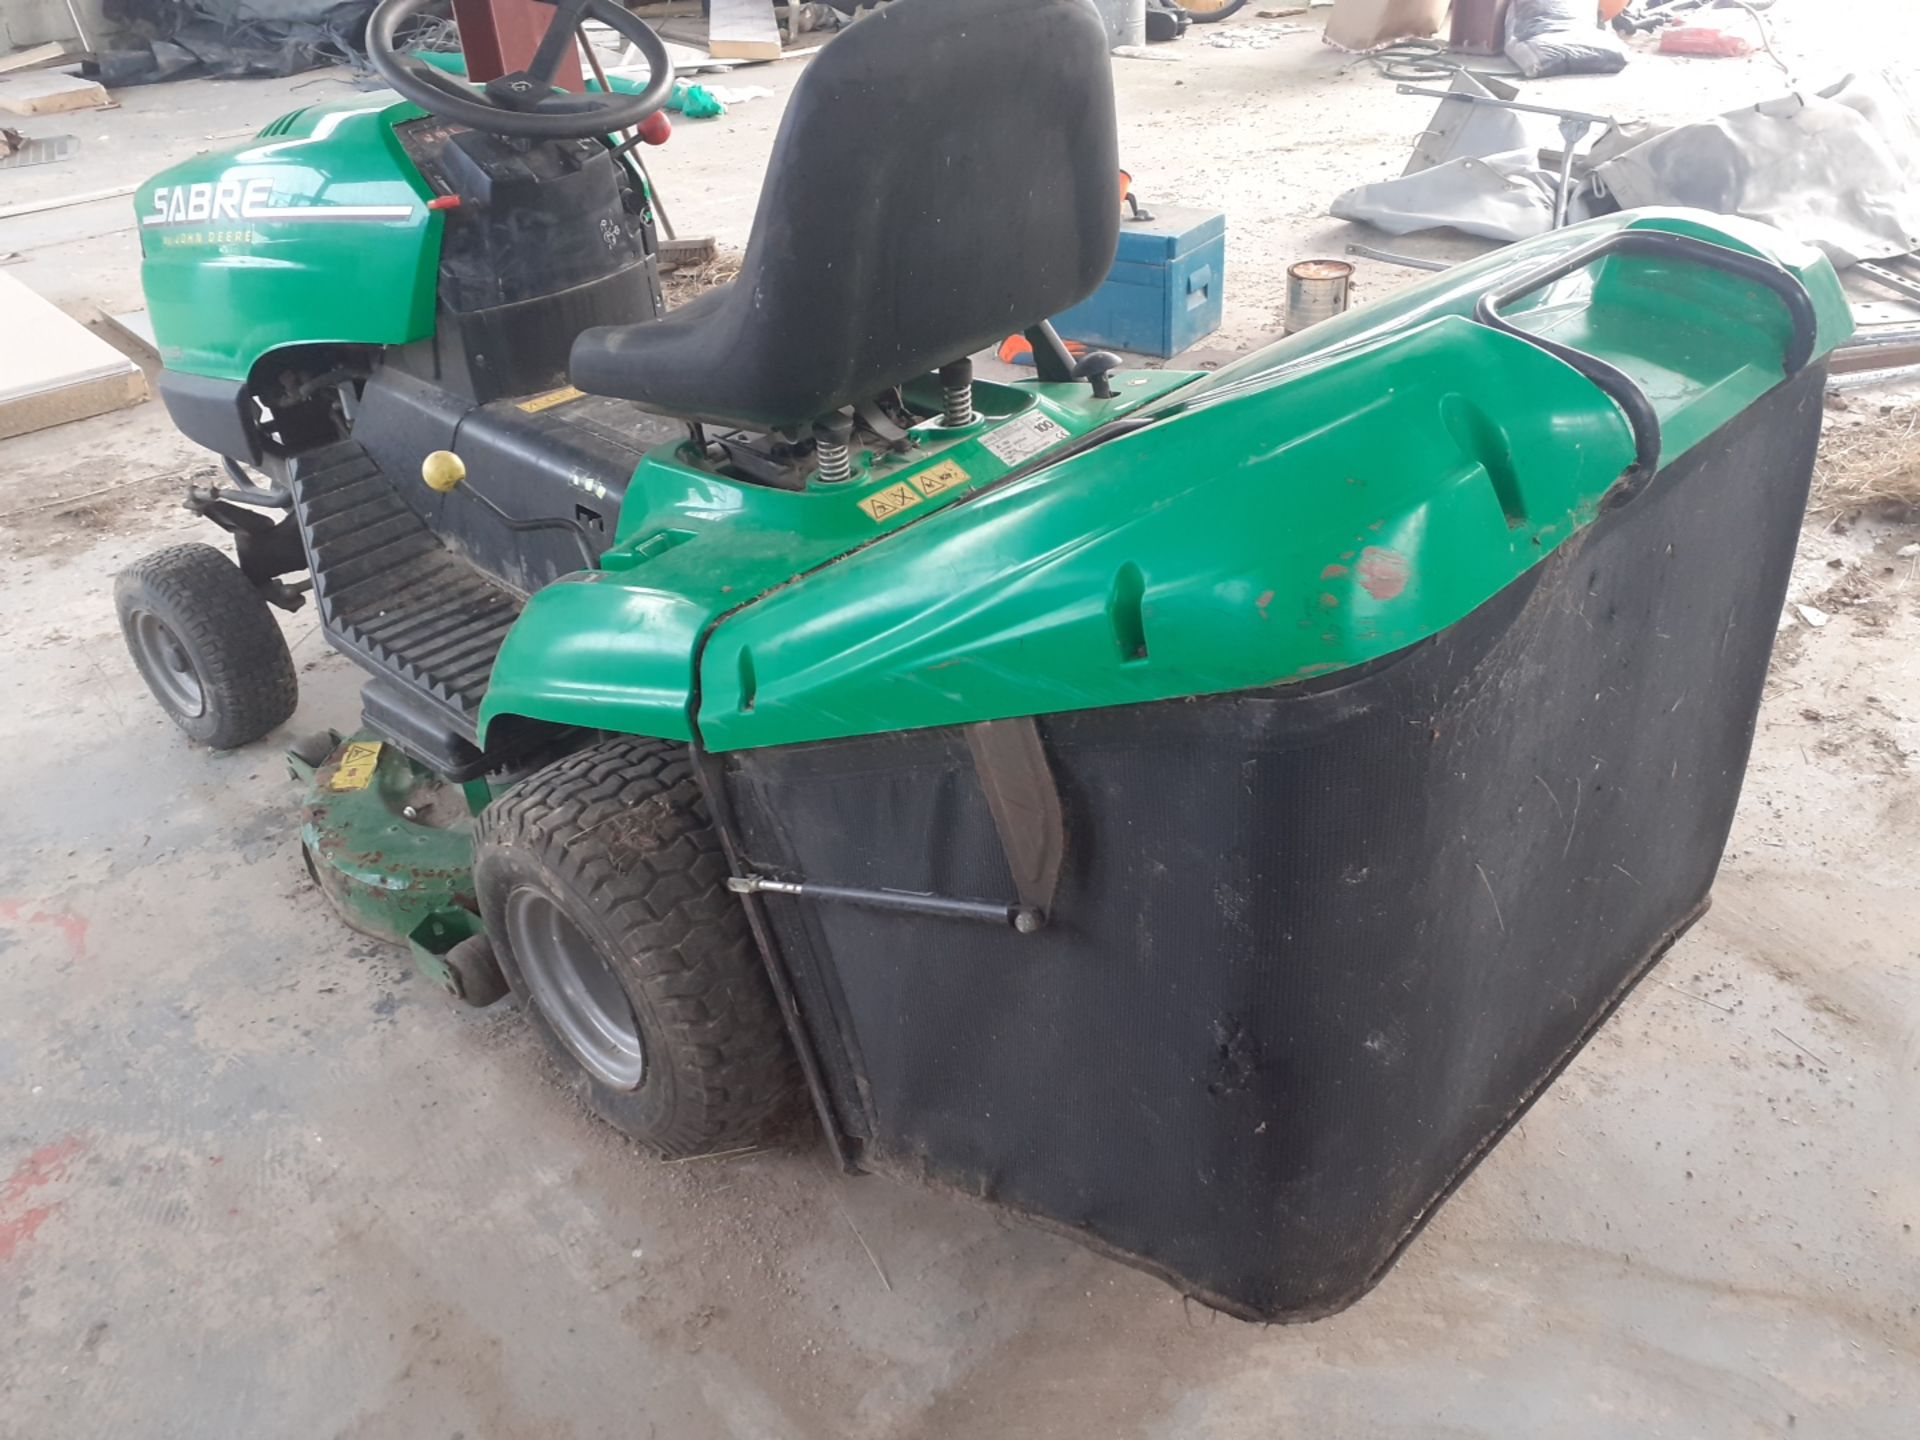 JOHN DEERE SABRE RIDE ON MOWER 1338 MODEL, NOT USED FOR 12 MONTHS - WILL REQUIRE BATTERY & SERVICE - Image 5 of 8